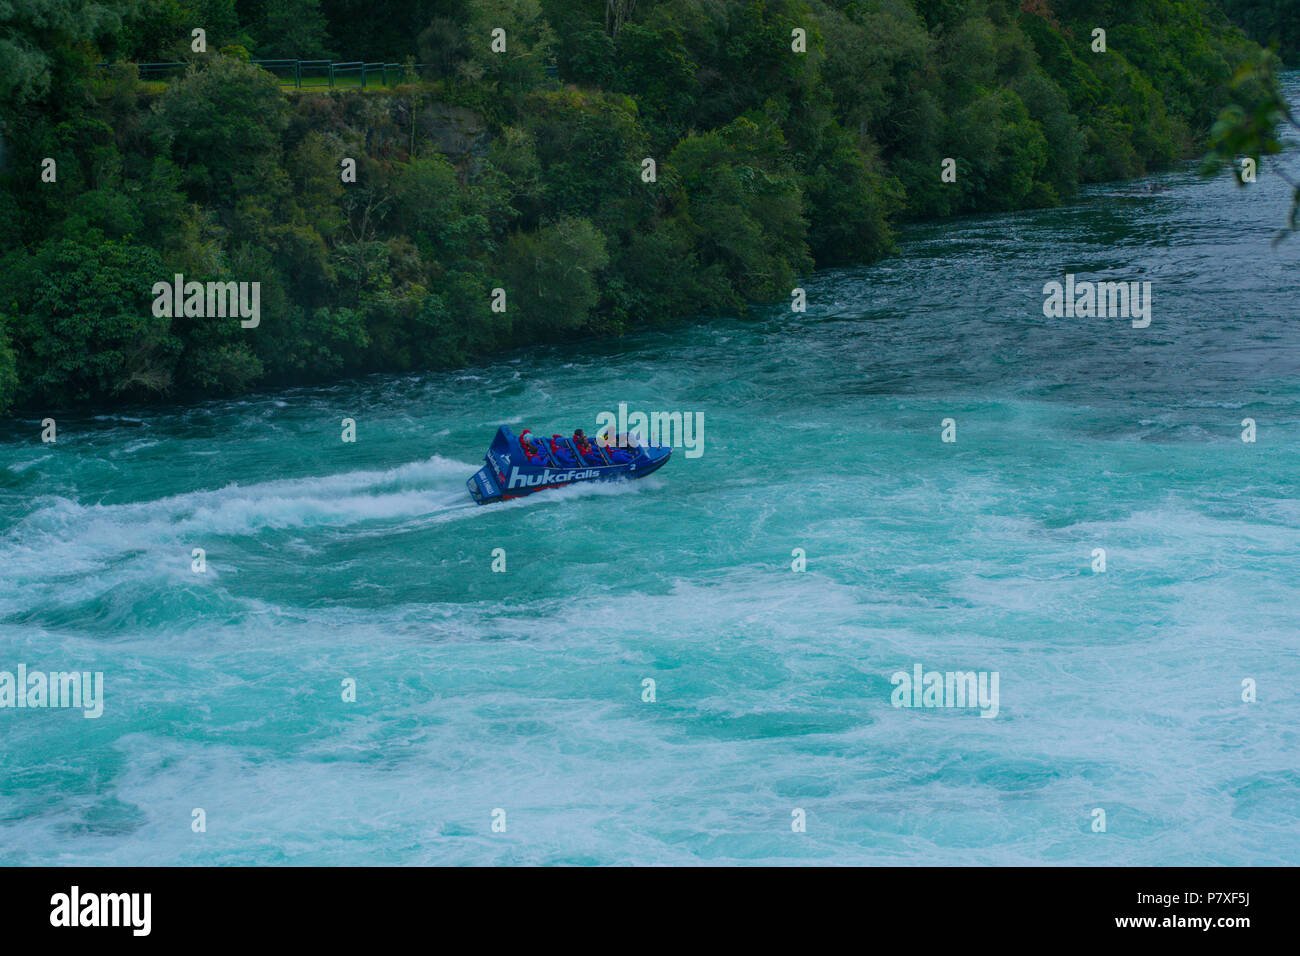 Huka falls jet boat cruising through river rapids with trees and bush line in background in Taupo, New Zealand Stock Photo